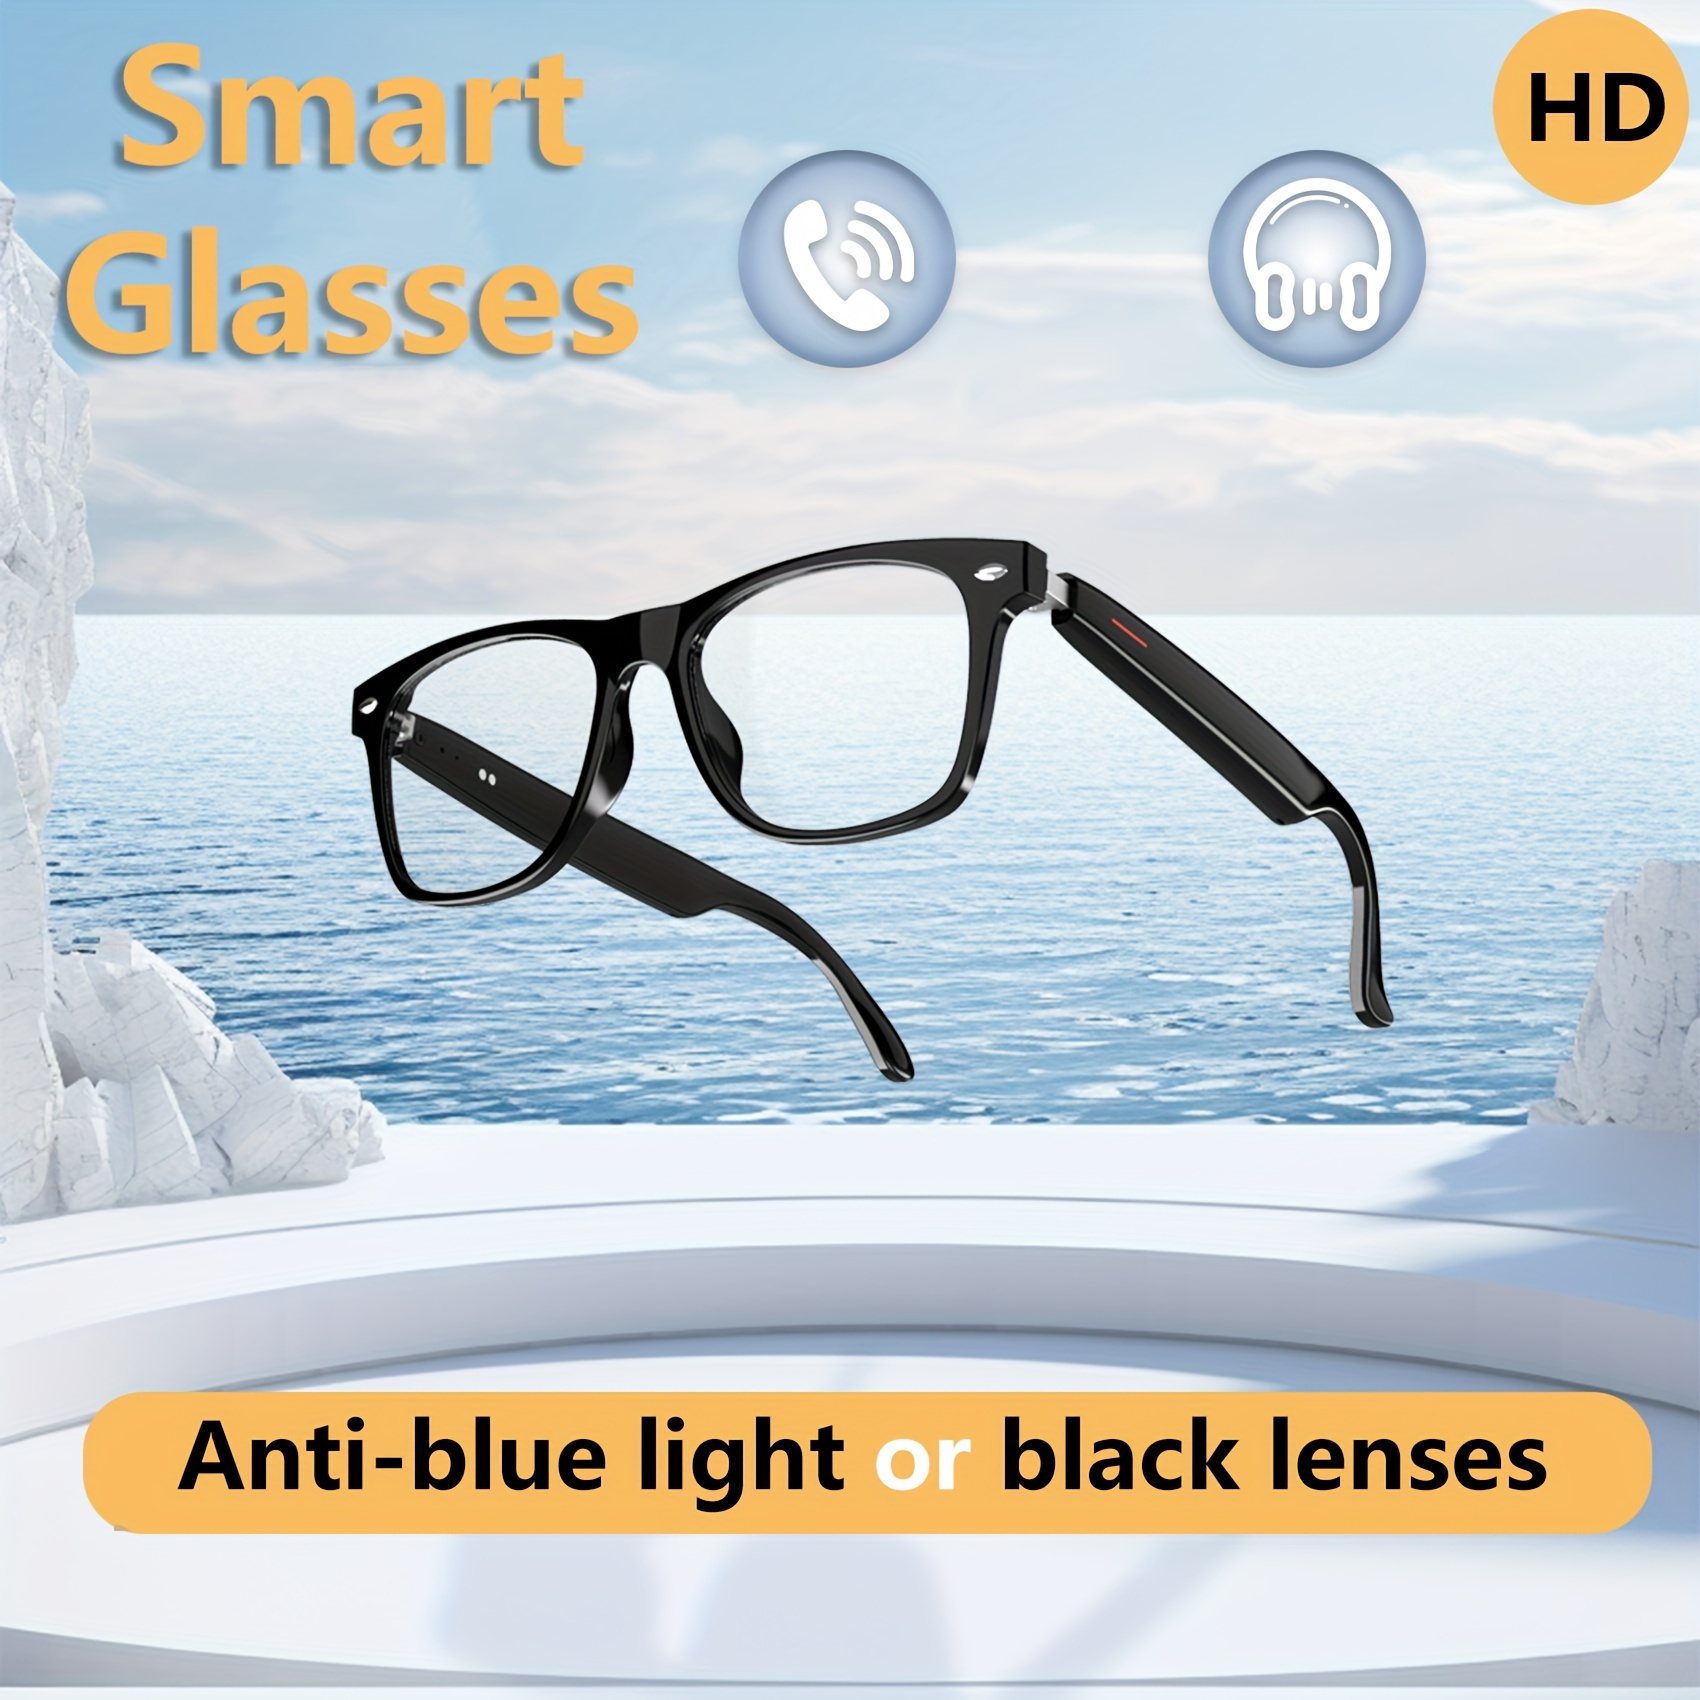 

Blackview Smart Wireless Audio Glasses, Anti-blue Light Lens, Suitable For Office, Outdoor, Sports Driving, Men's And Women's Smart Glasses, Music Playback, Hands-free Phone Calls, Black Frame.